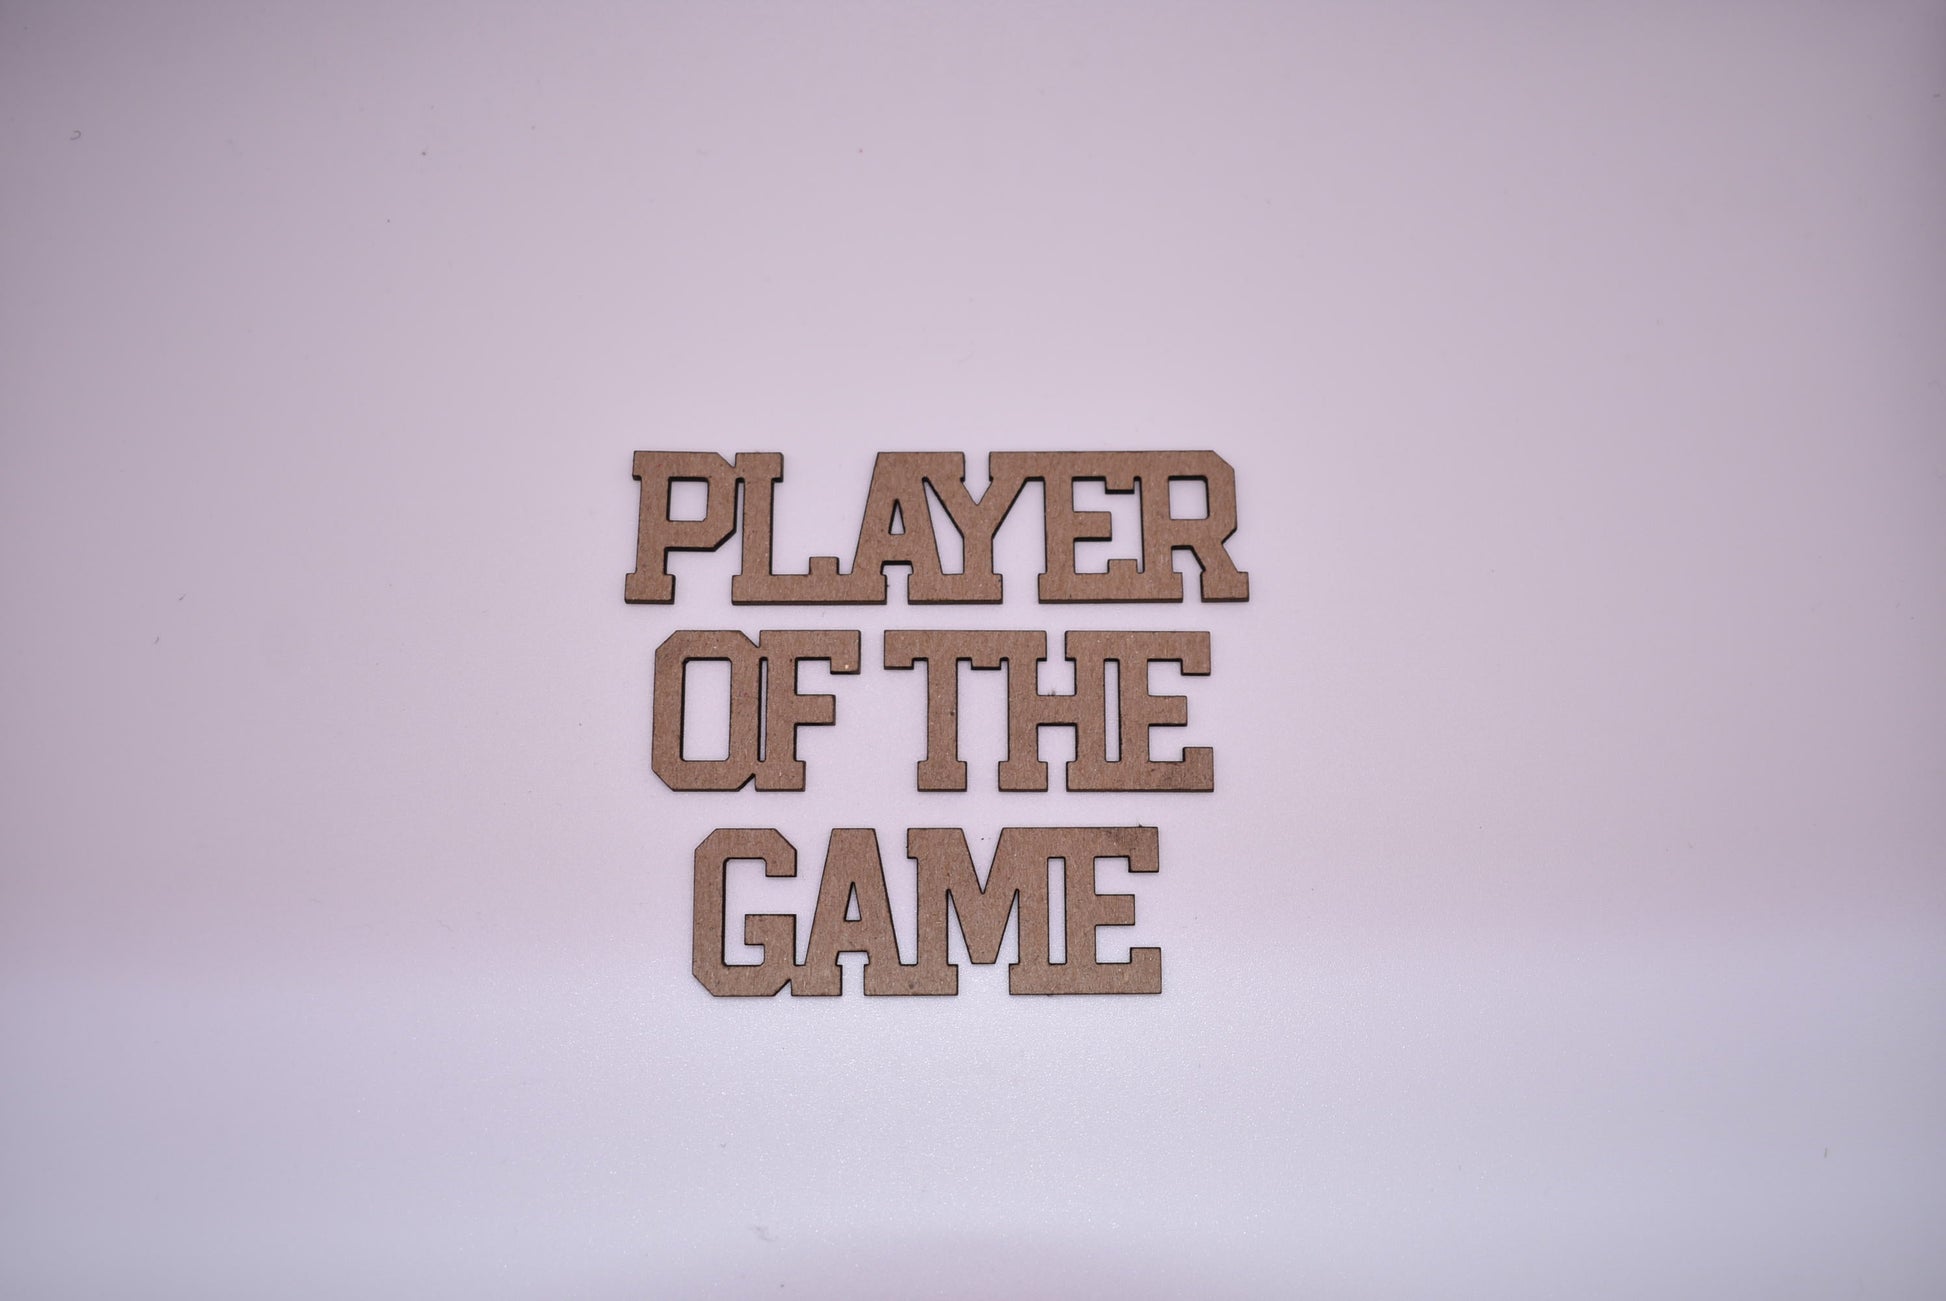 Player of the game - Creative Designs By Kari